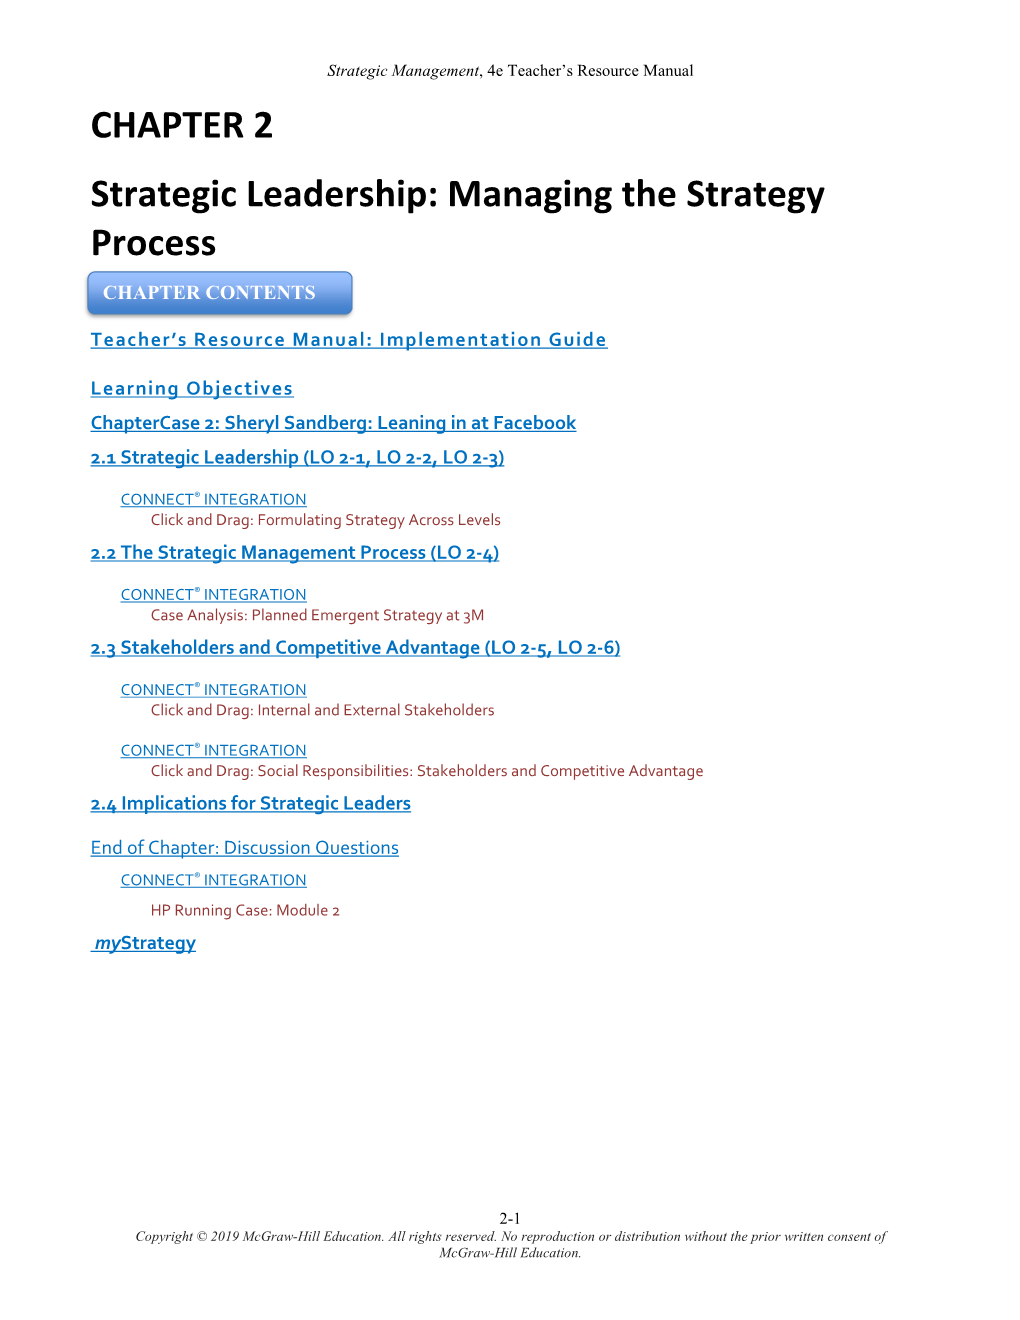 CHAPTER 2 Strategic Leadership: Managing the Strategy Process CHAPTER CONTENTS